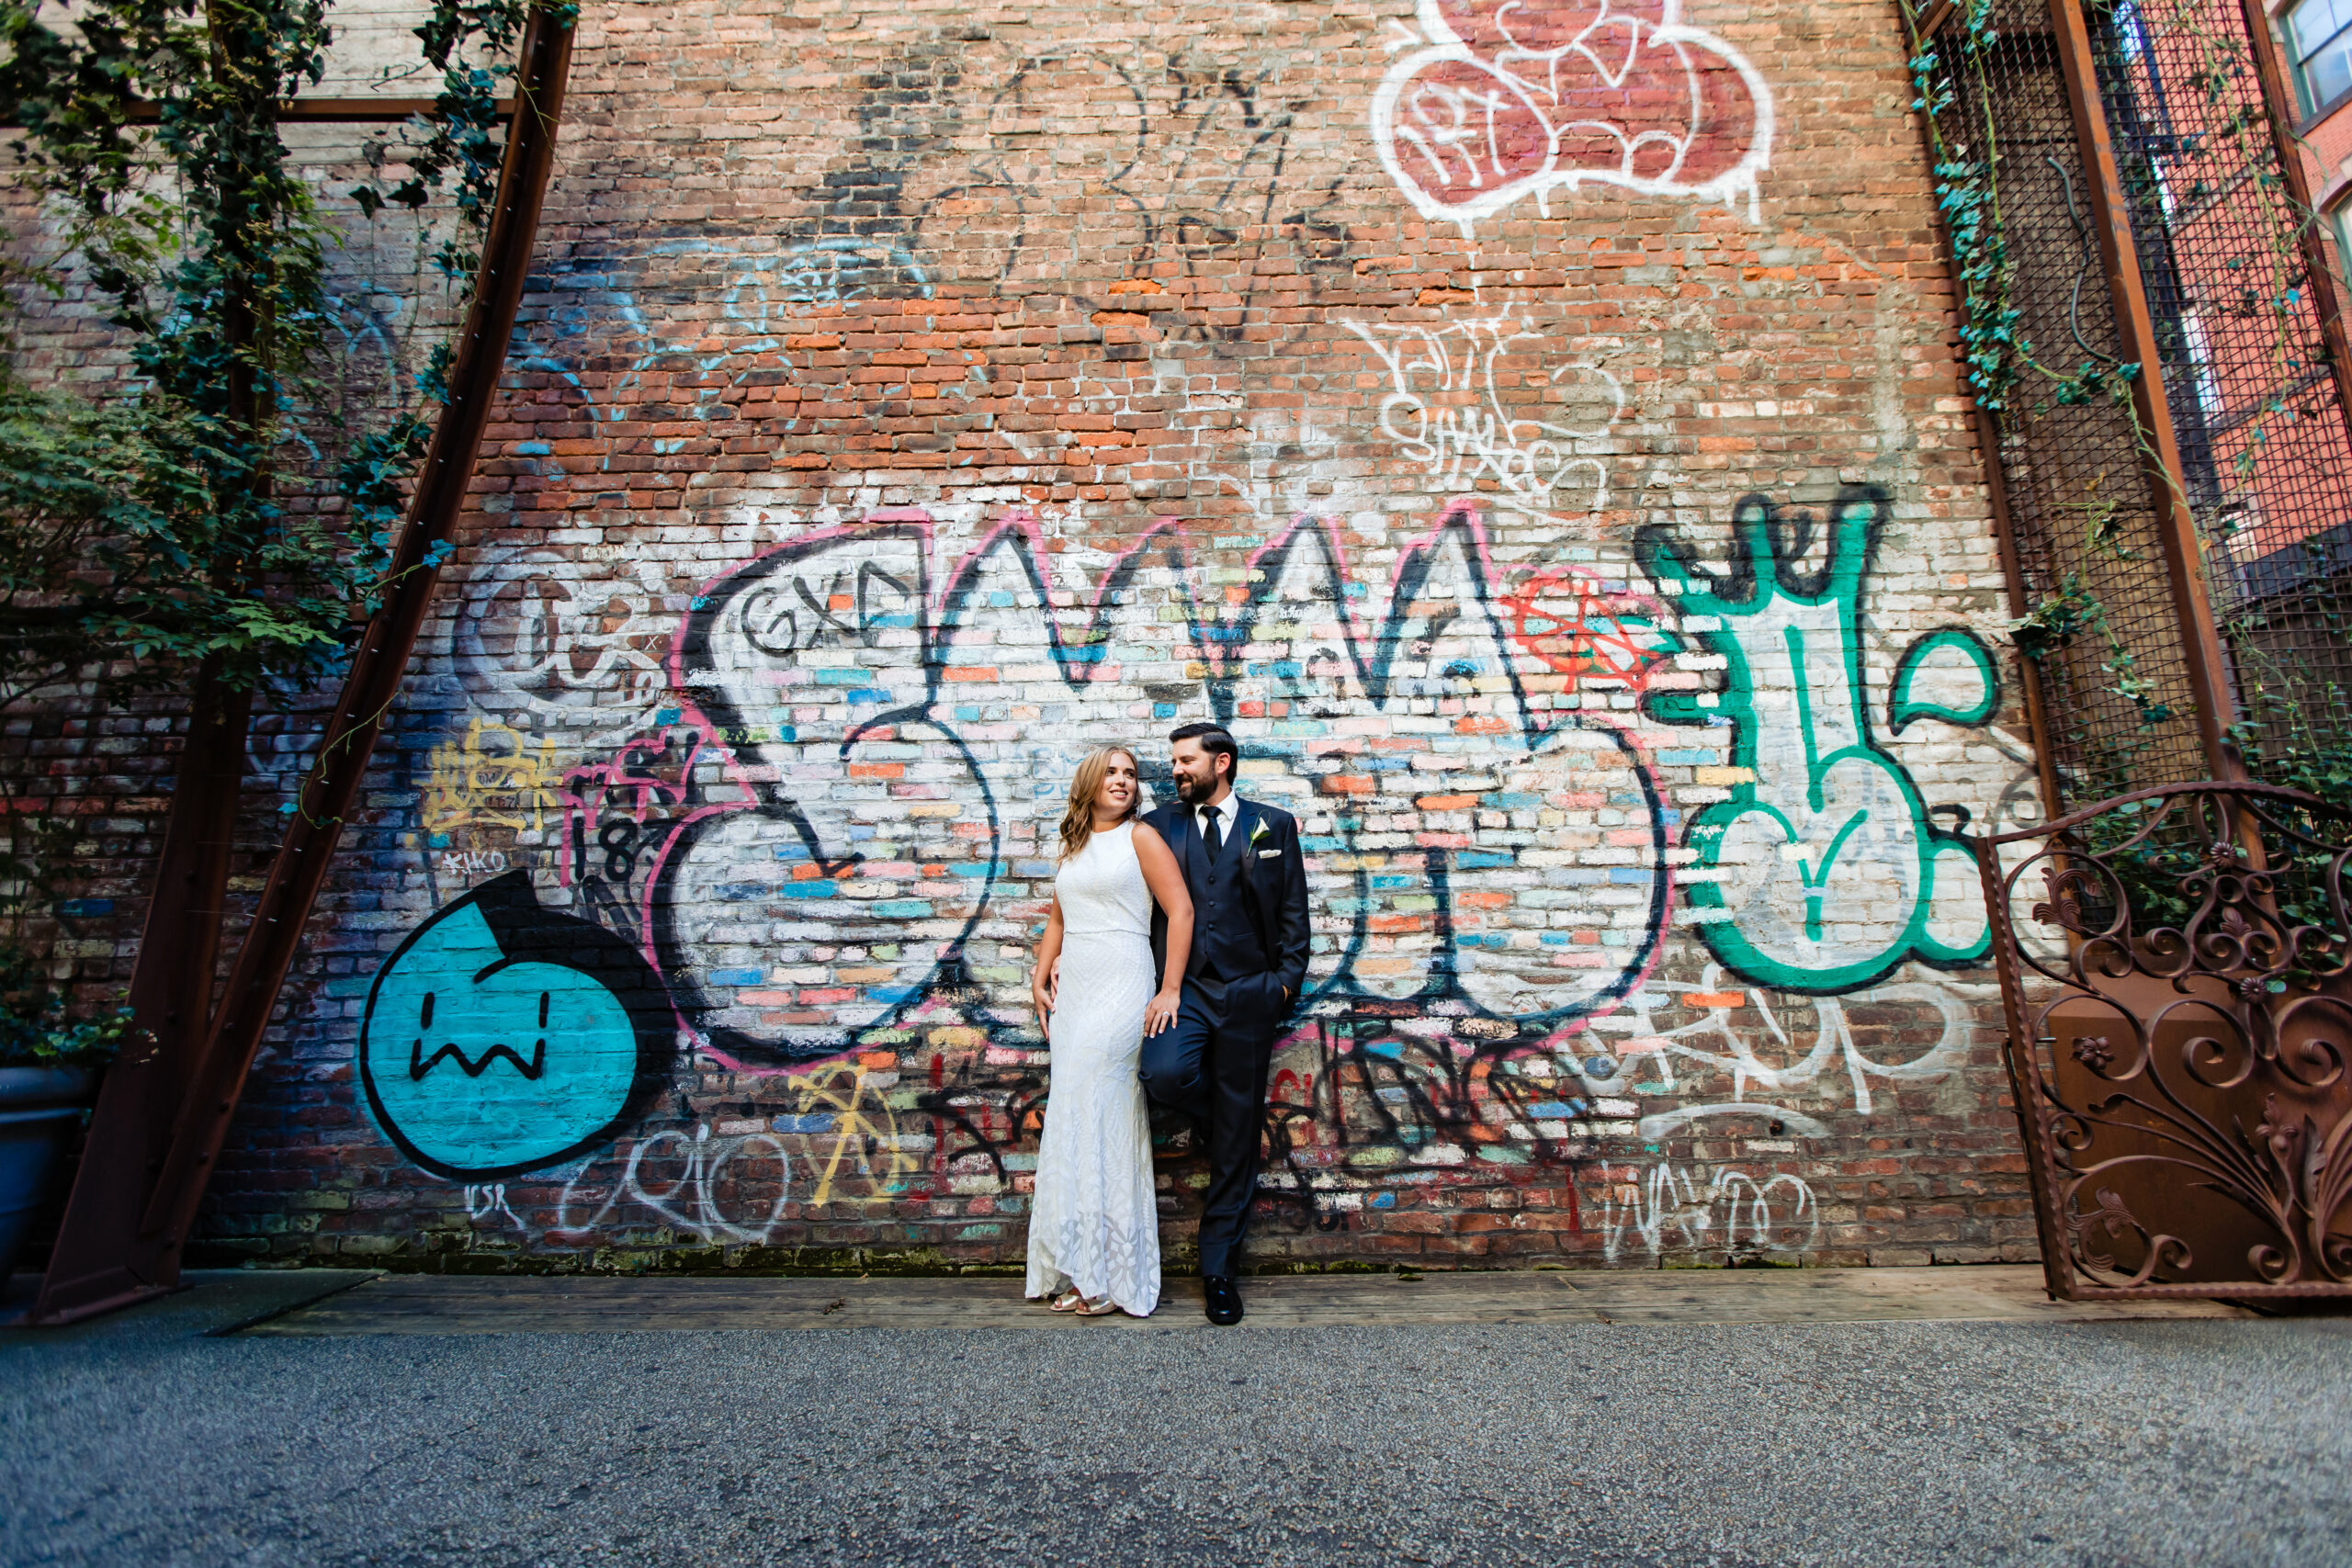 A bride and groom, captured by New Jersey Wedding Photographer Jarot Bocanegra, standing in front of a graffiti covered wall.